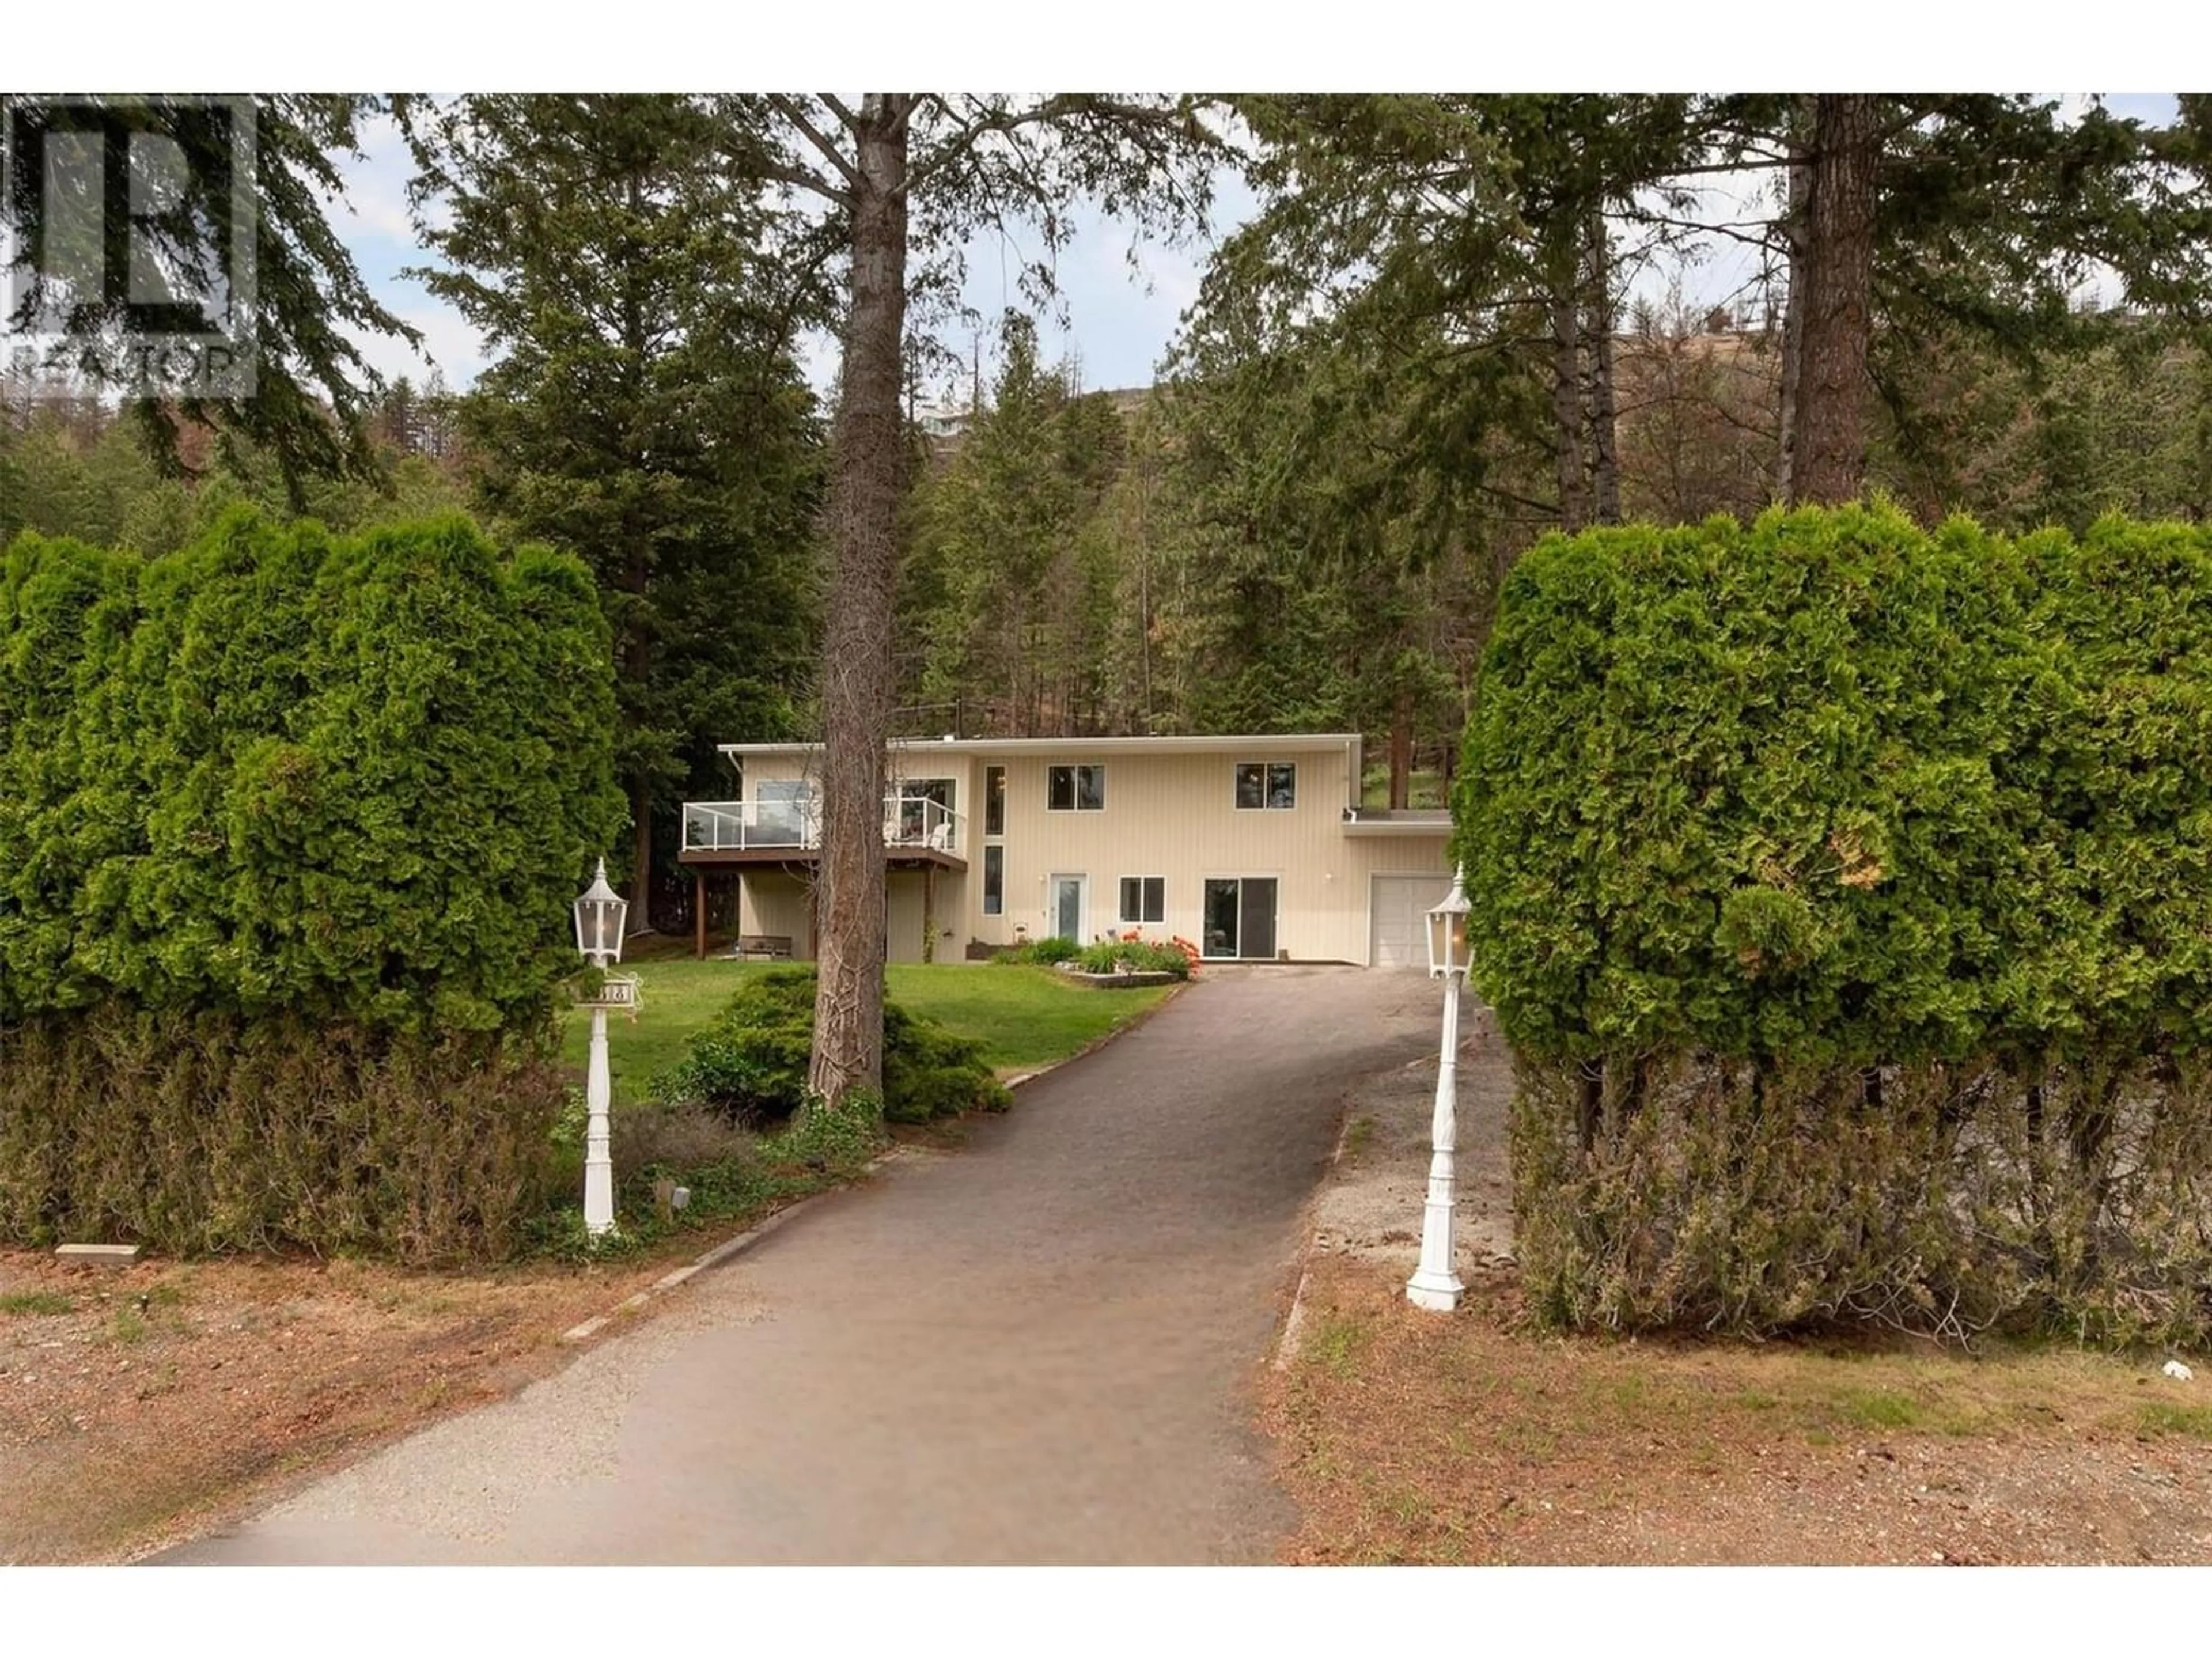 Outside view for 1338 Parkinson Road, West Kelowna British Columbia V1Z2R7